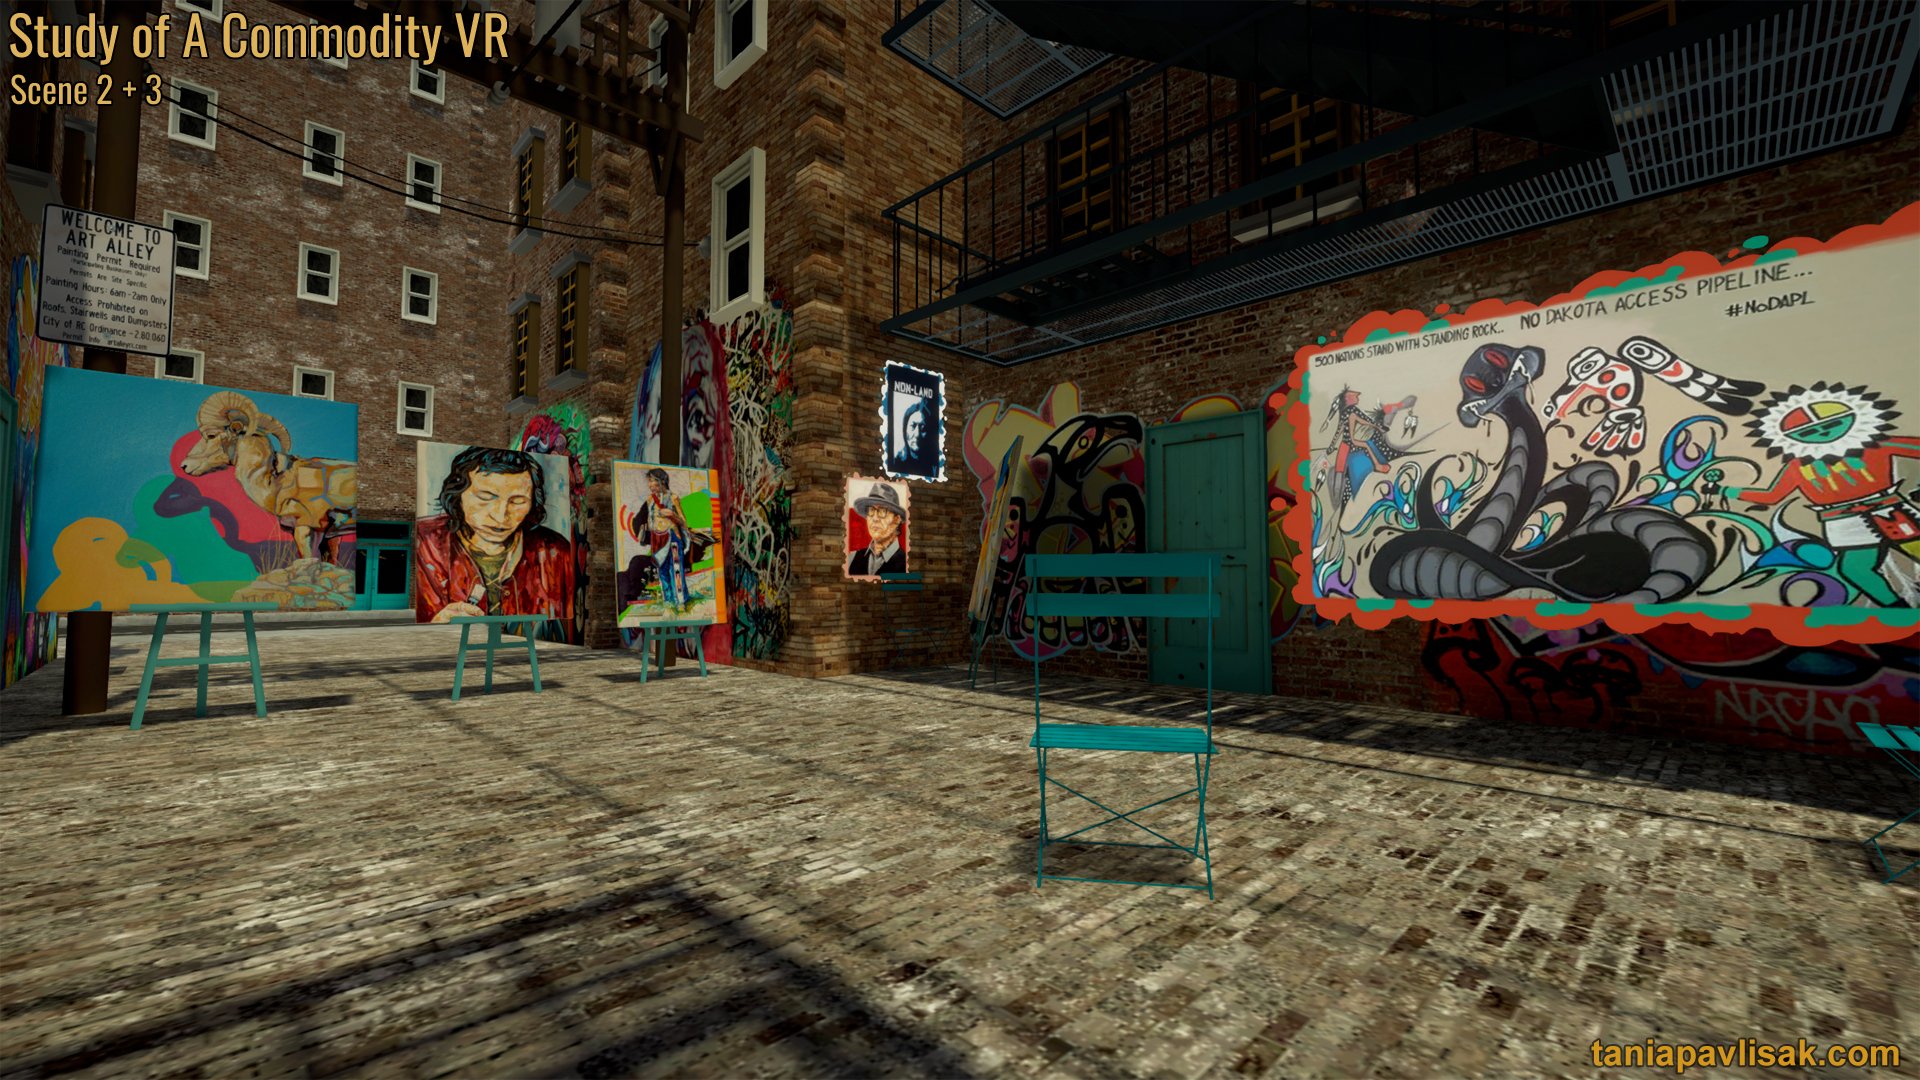 View of an art alley, with street art and a mini-gallery of Louis Still Smoking's artworks.